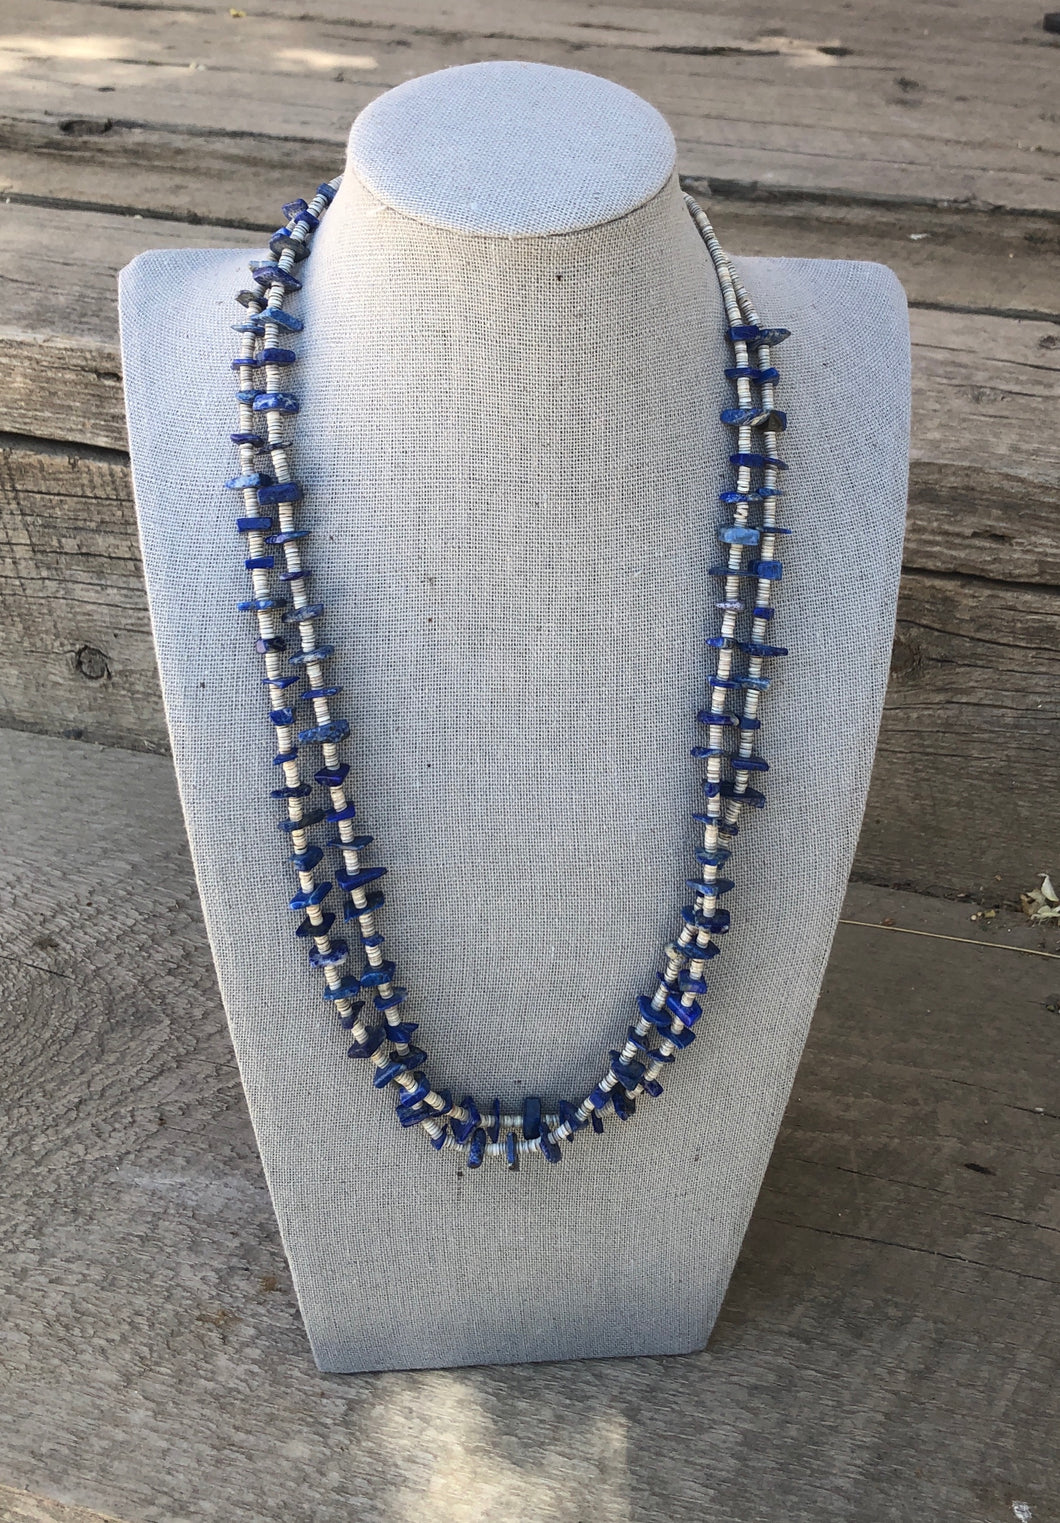 RG6, Double Strand Lapis and Heishi Necklace - Necklaces - Cerrillos Station | Fine Art Gallery, Native American Jewelry & Shop